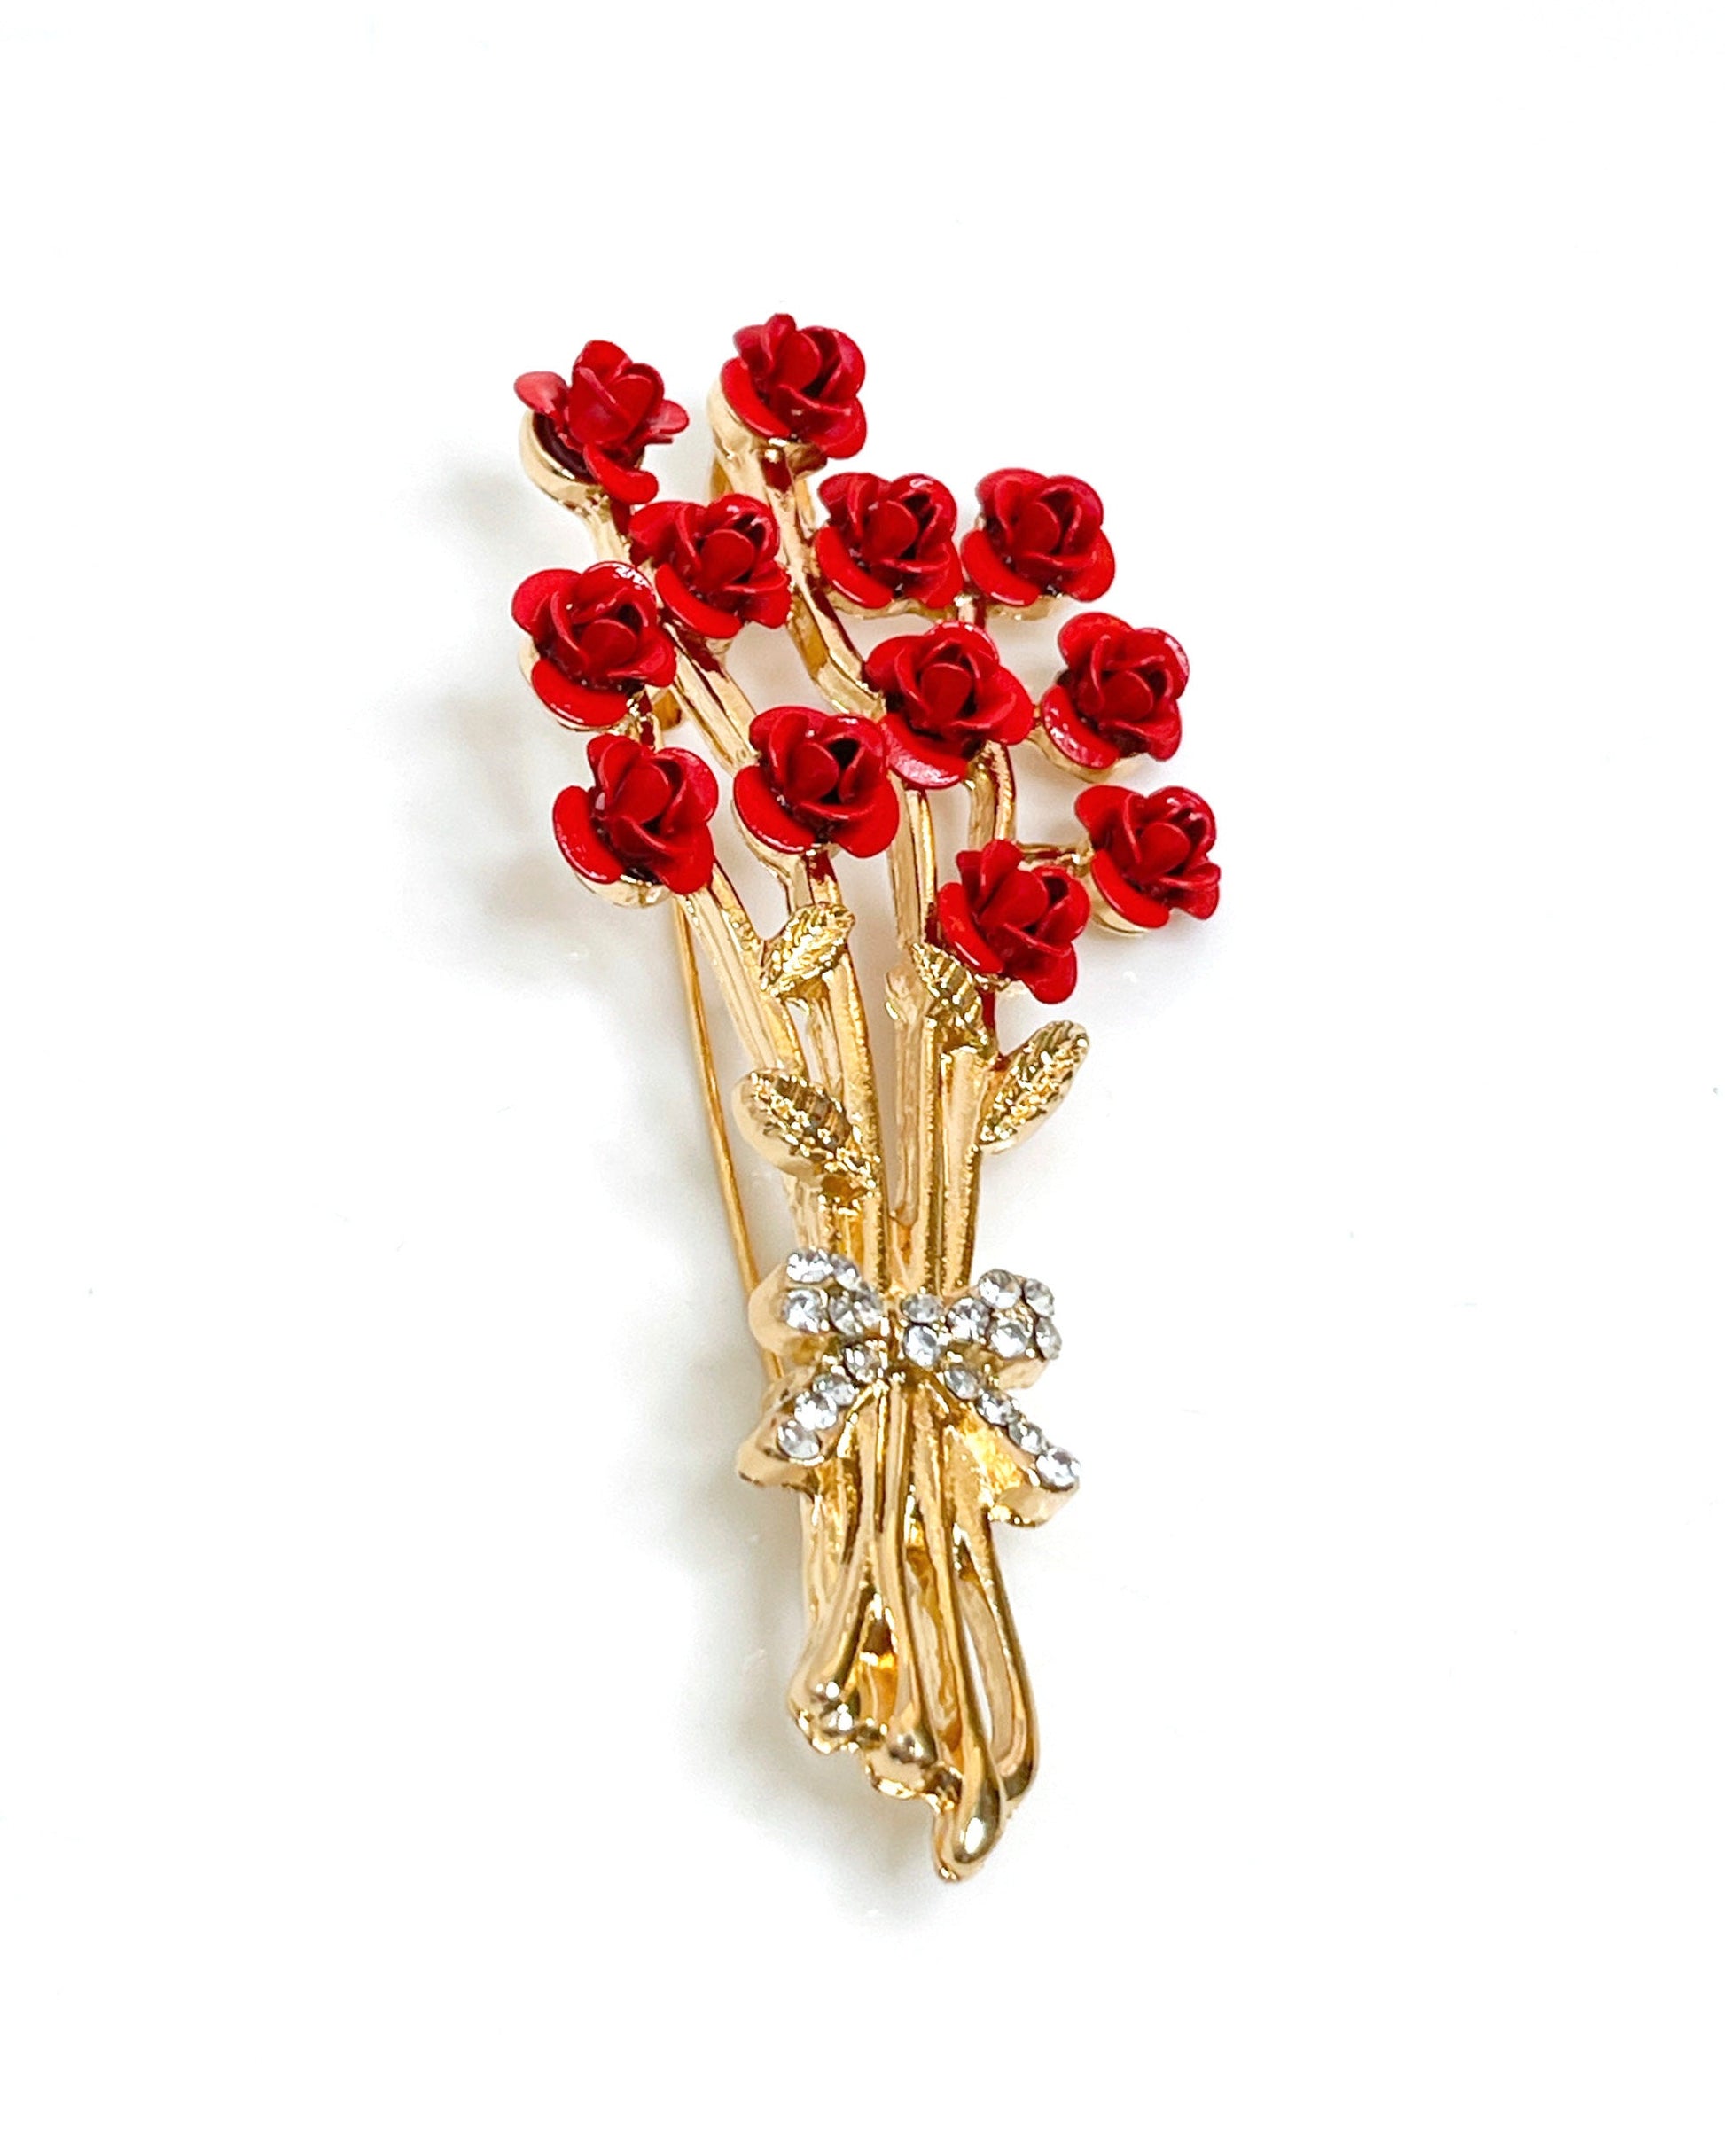 Pretty Bunch of Roses Brooch | Red Gold Roses with Crystals Jacket Pin